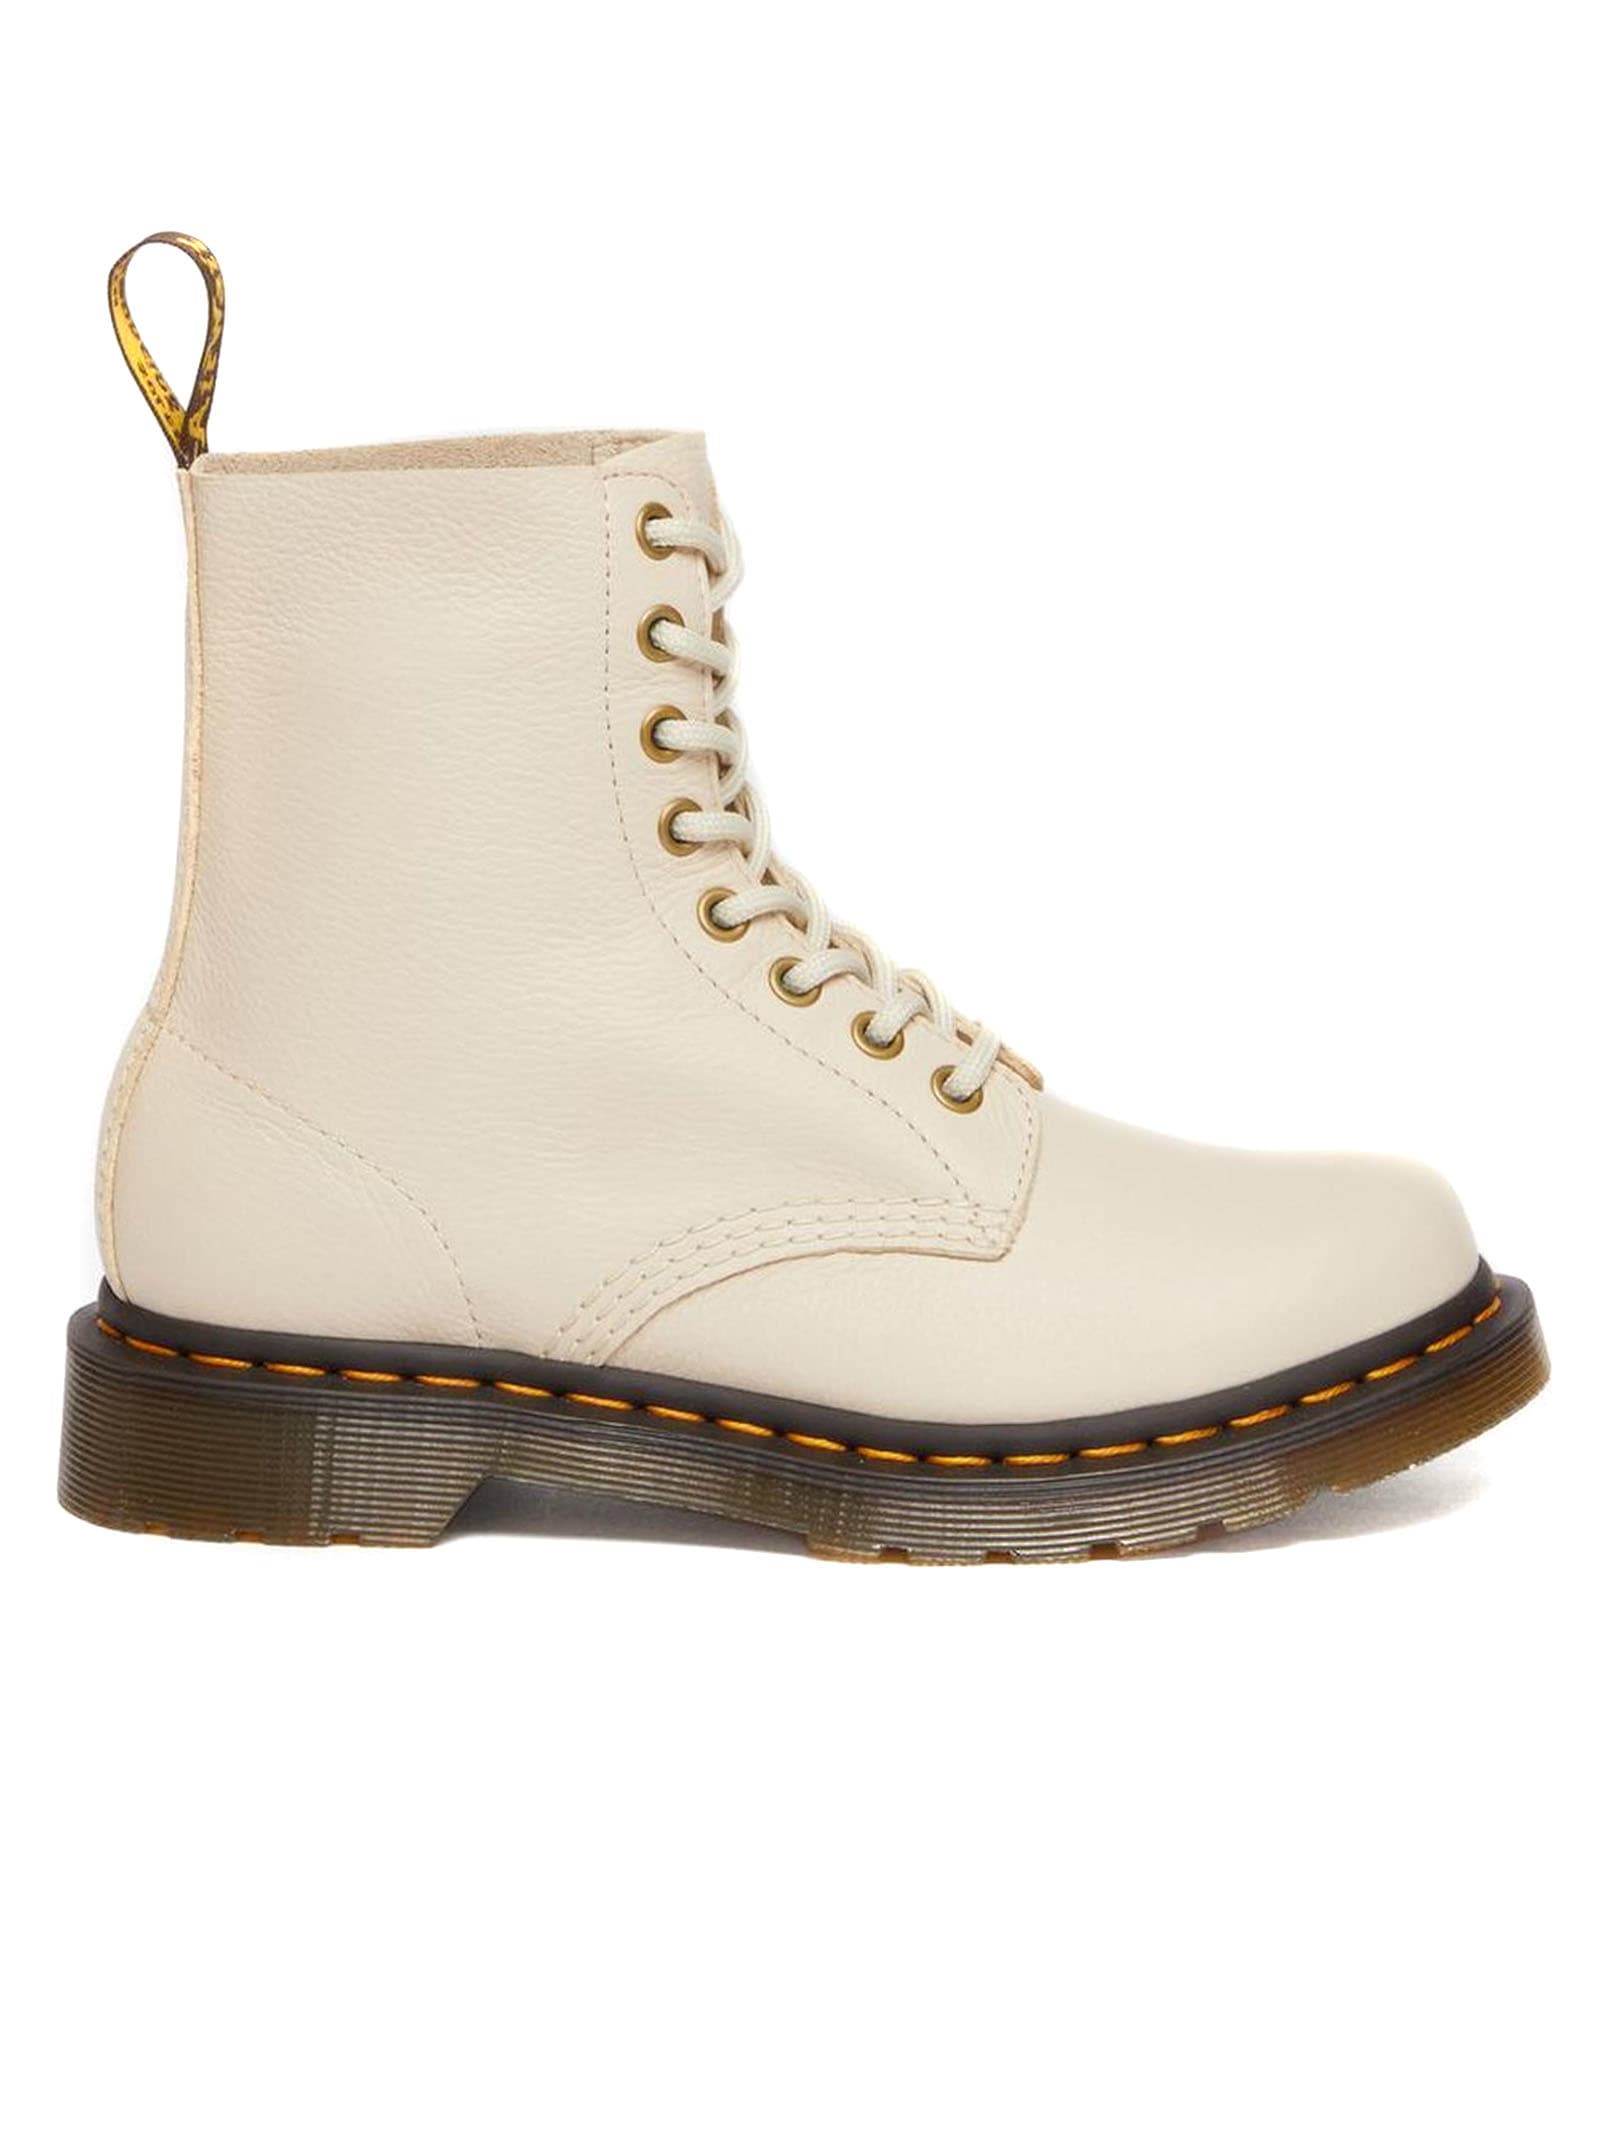 Dr. Martens Beige Leather Pascal Virginia Boots